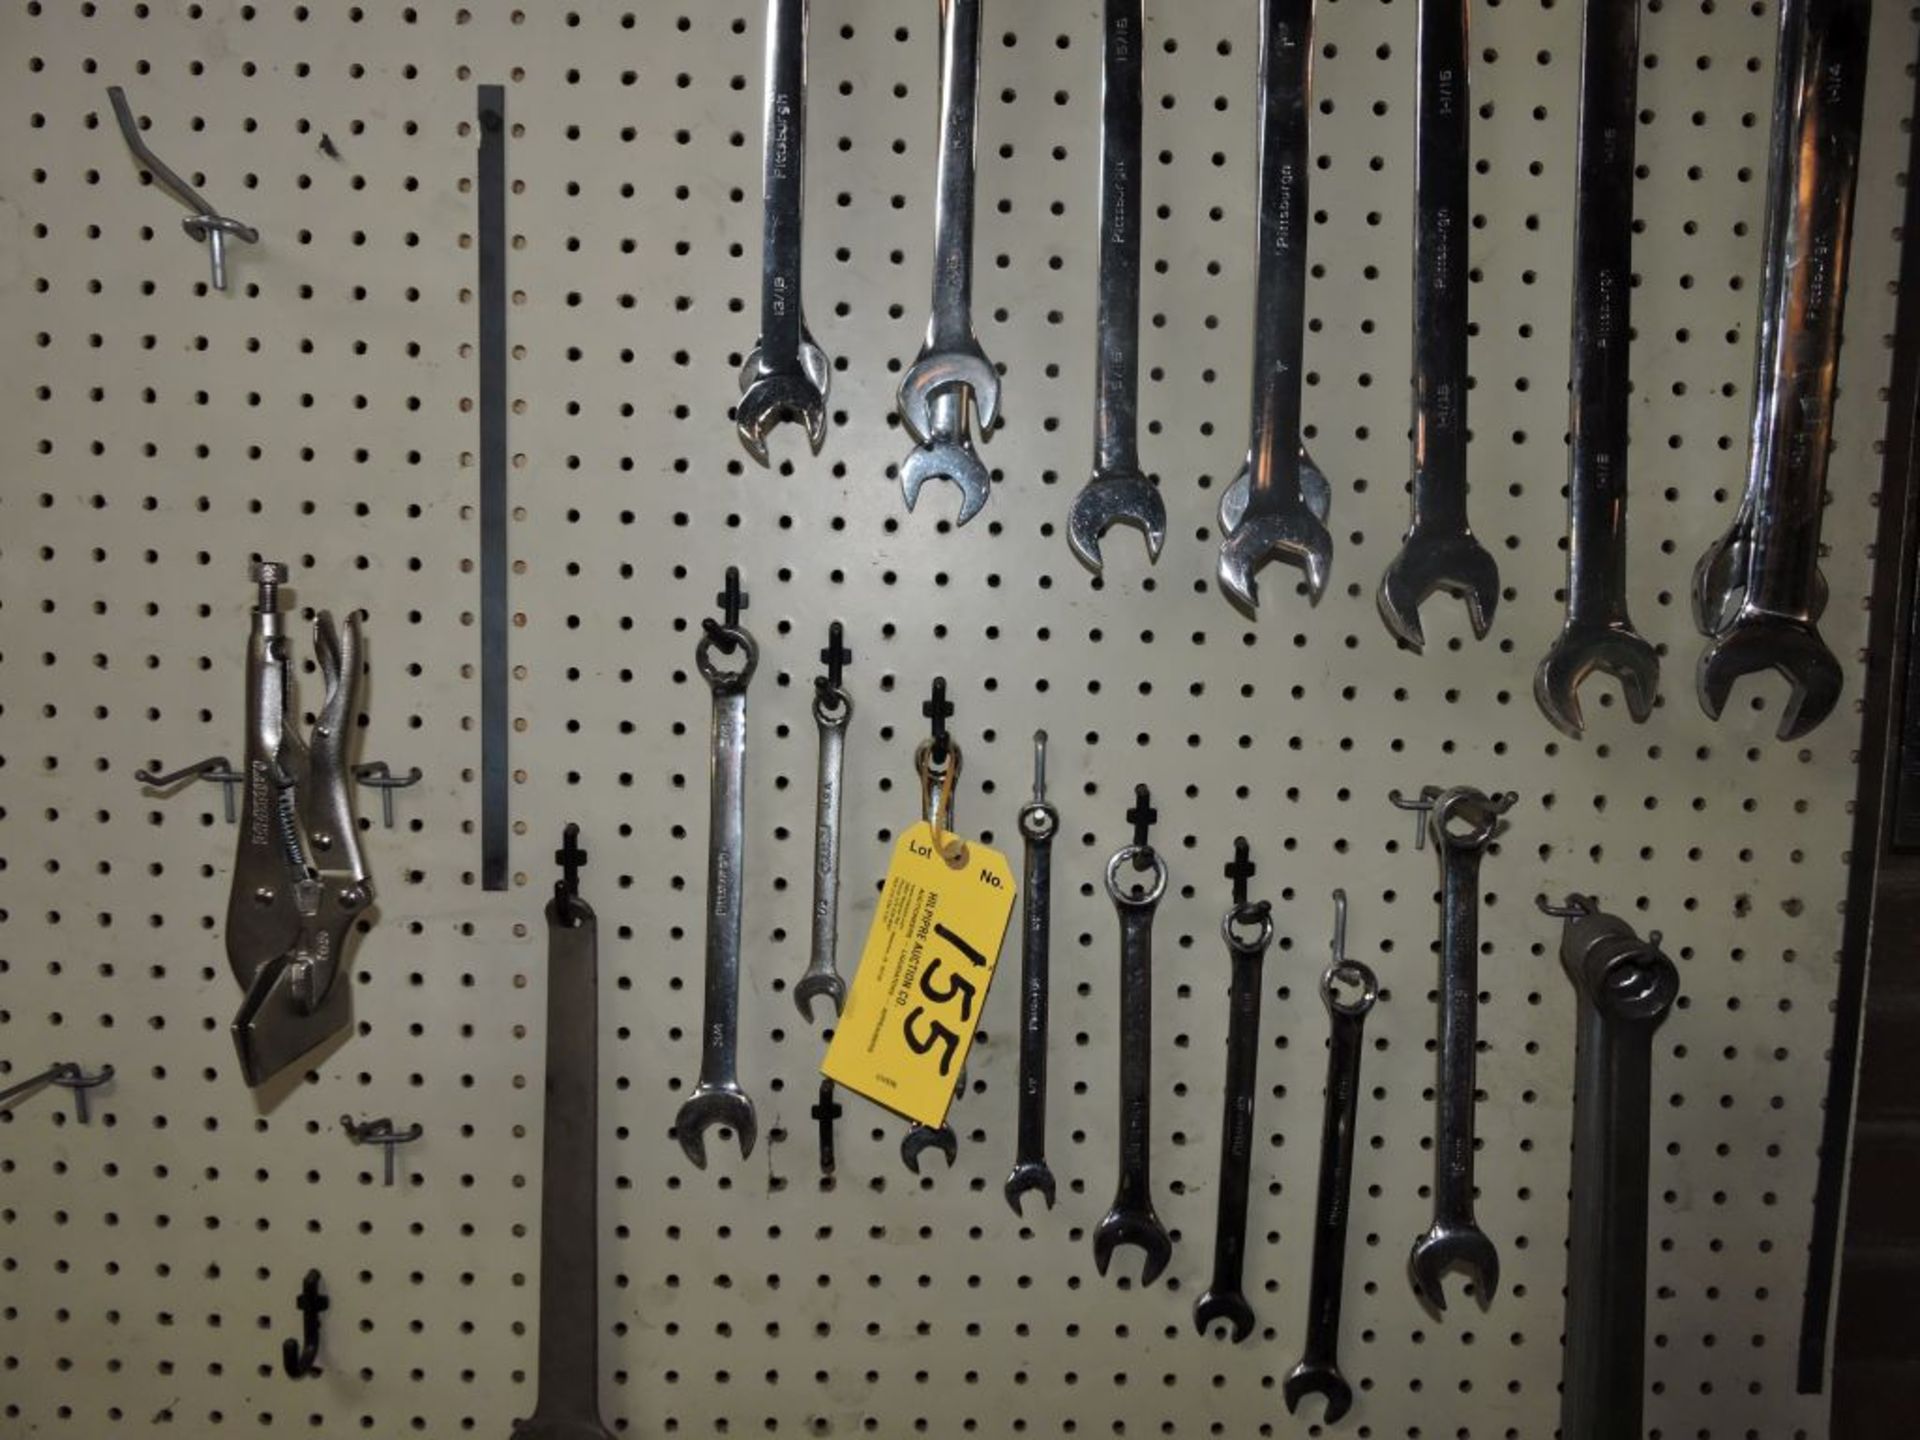 Assorted wrenches, all items on board.